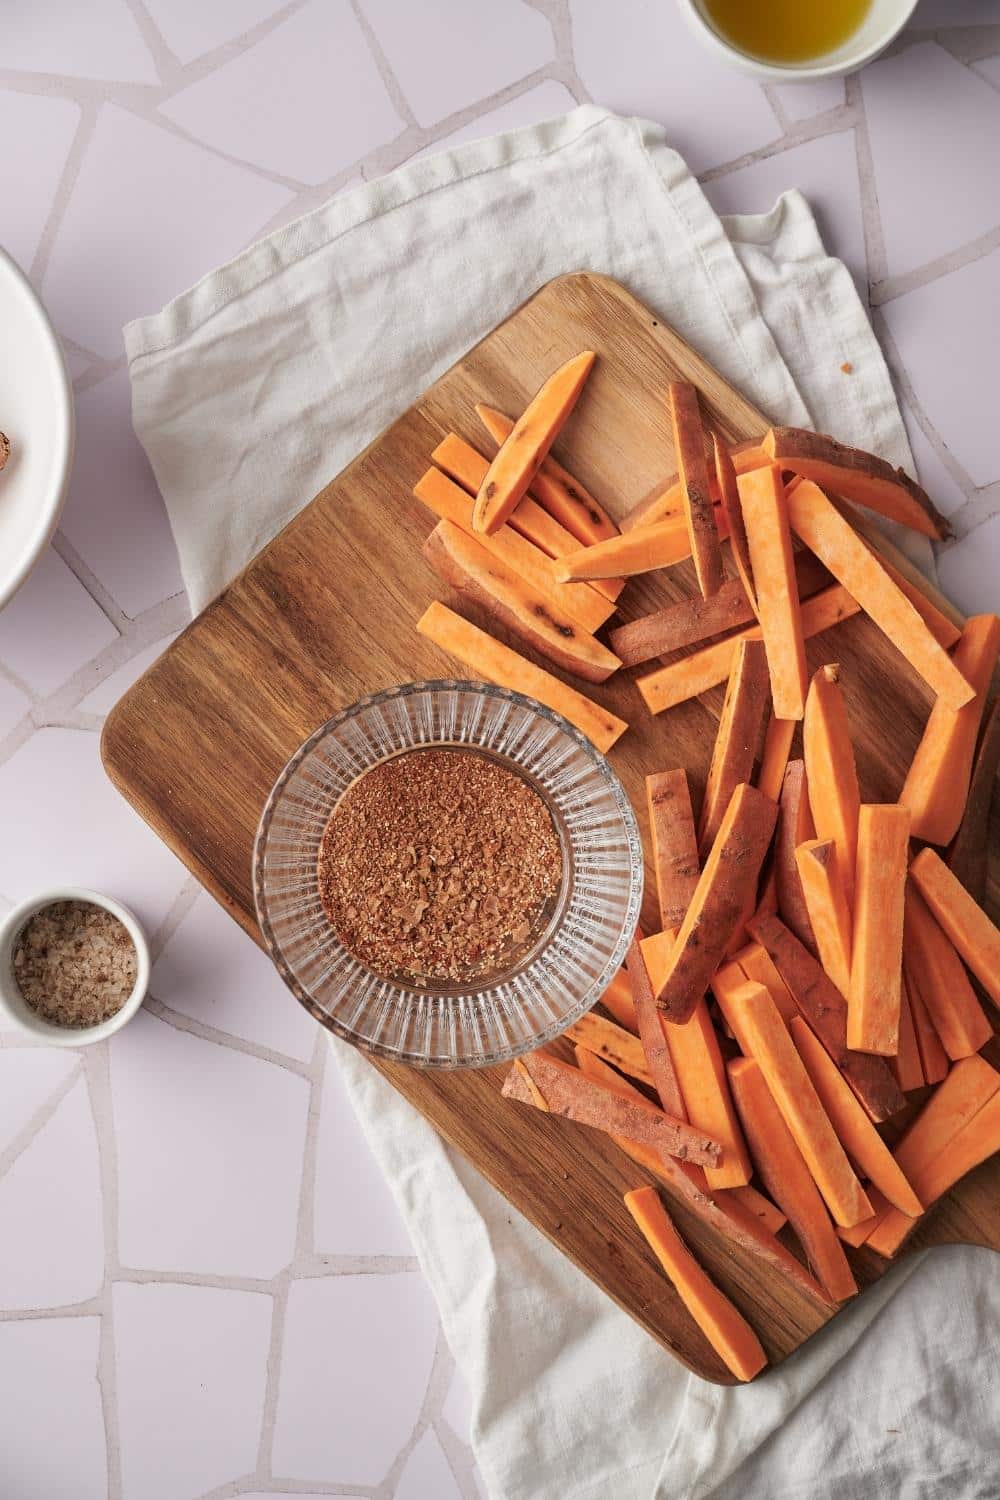 chopped sweet potato fries on a wooden cutting board resting on a tea towel. A glass bowl of seasoning mix sits next to the fries.